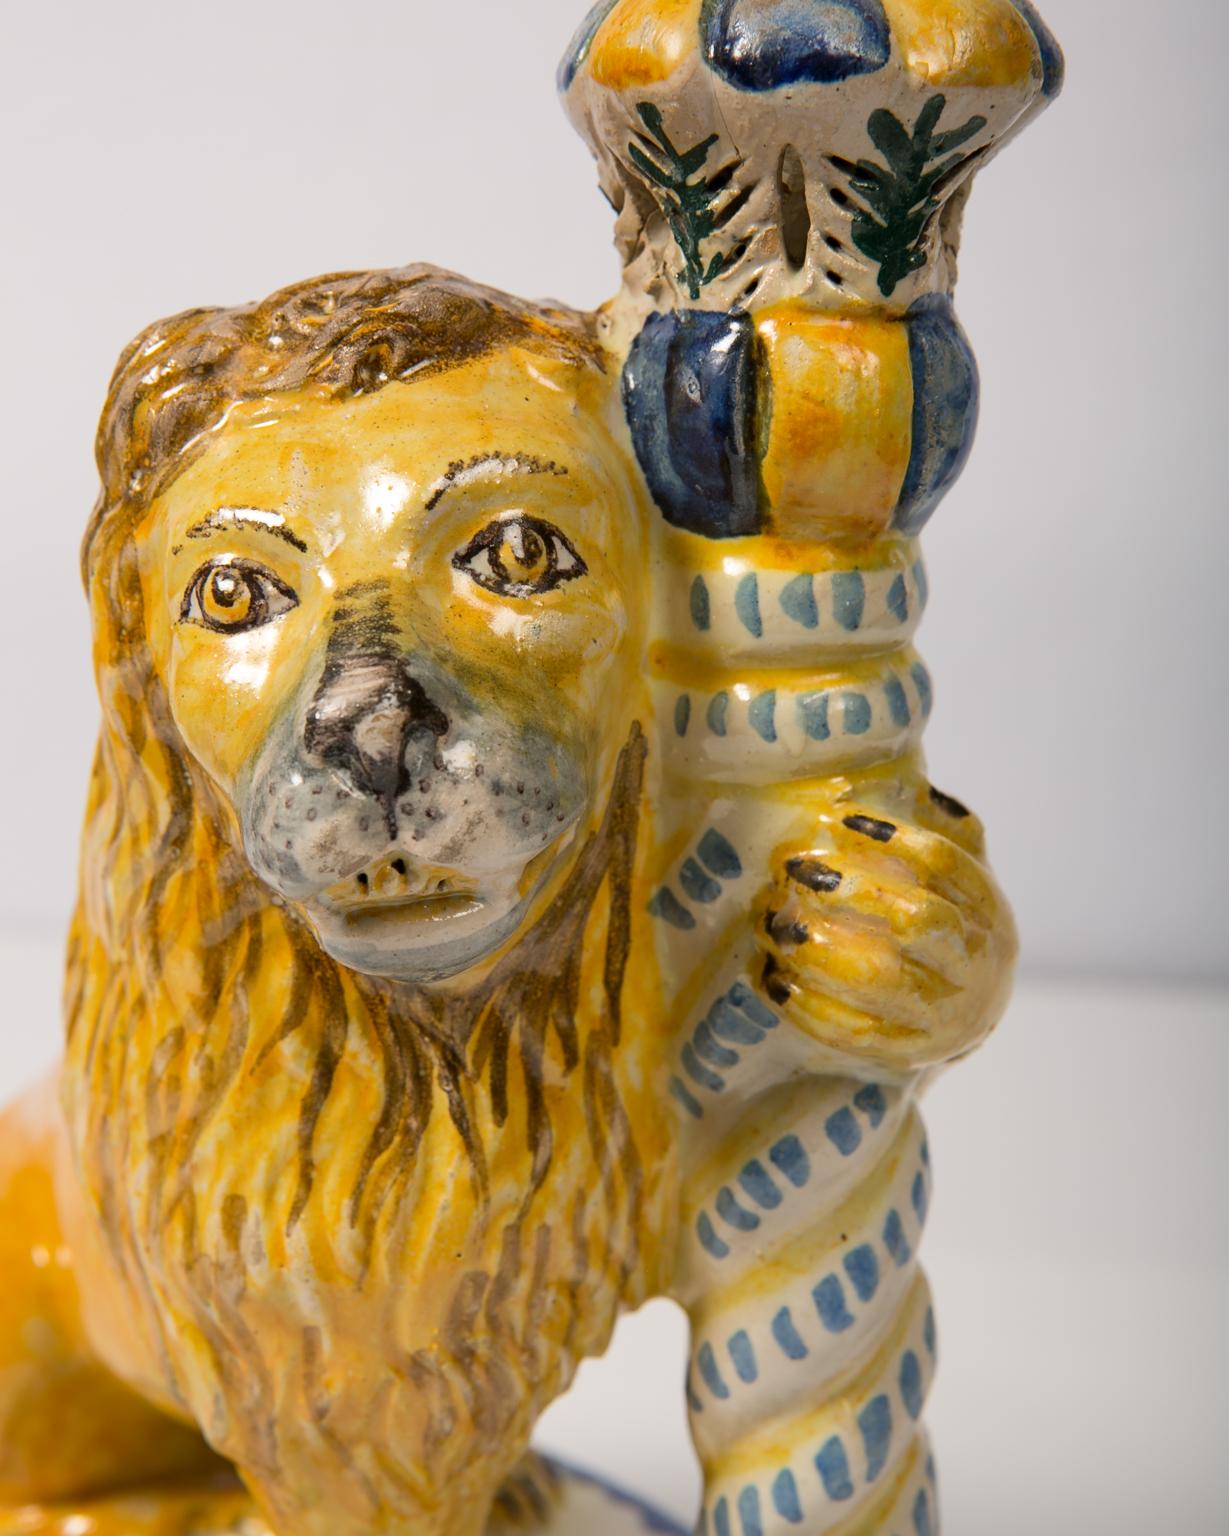 WHY WE LOVE IT: They're Italian!
We are pleased to offer this superb pair of antique faience lions holding candlesticks. With friendly smiling faces these lions have lots of personality. Made in Italy in the mid-19th century they have coats with a